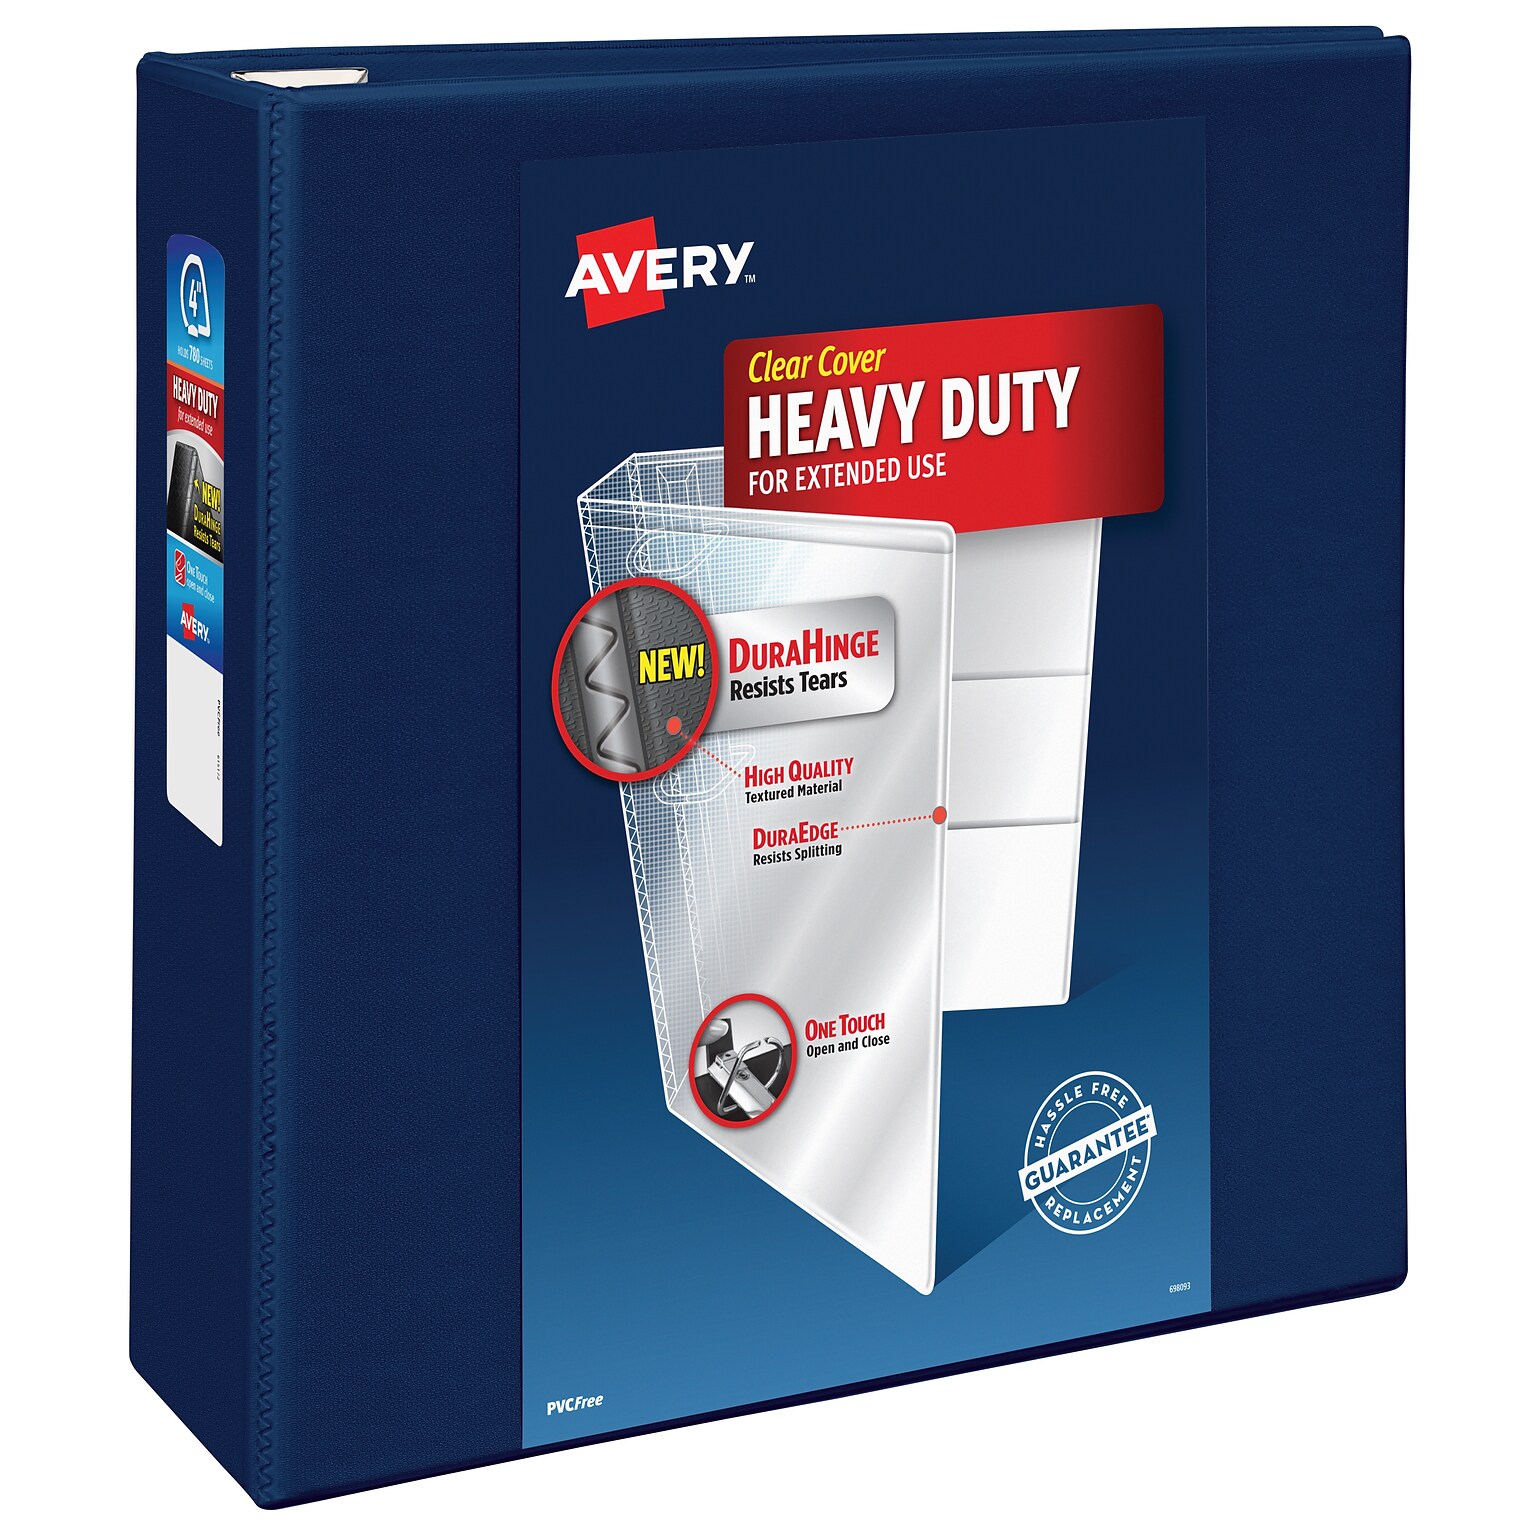 Avery Heavy Duty 4 3-Ring View Binders, D-Ring, Navy Blue (79804)